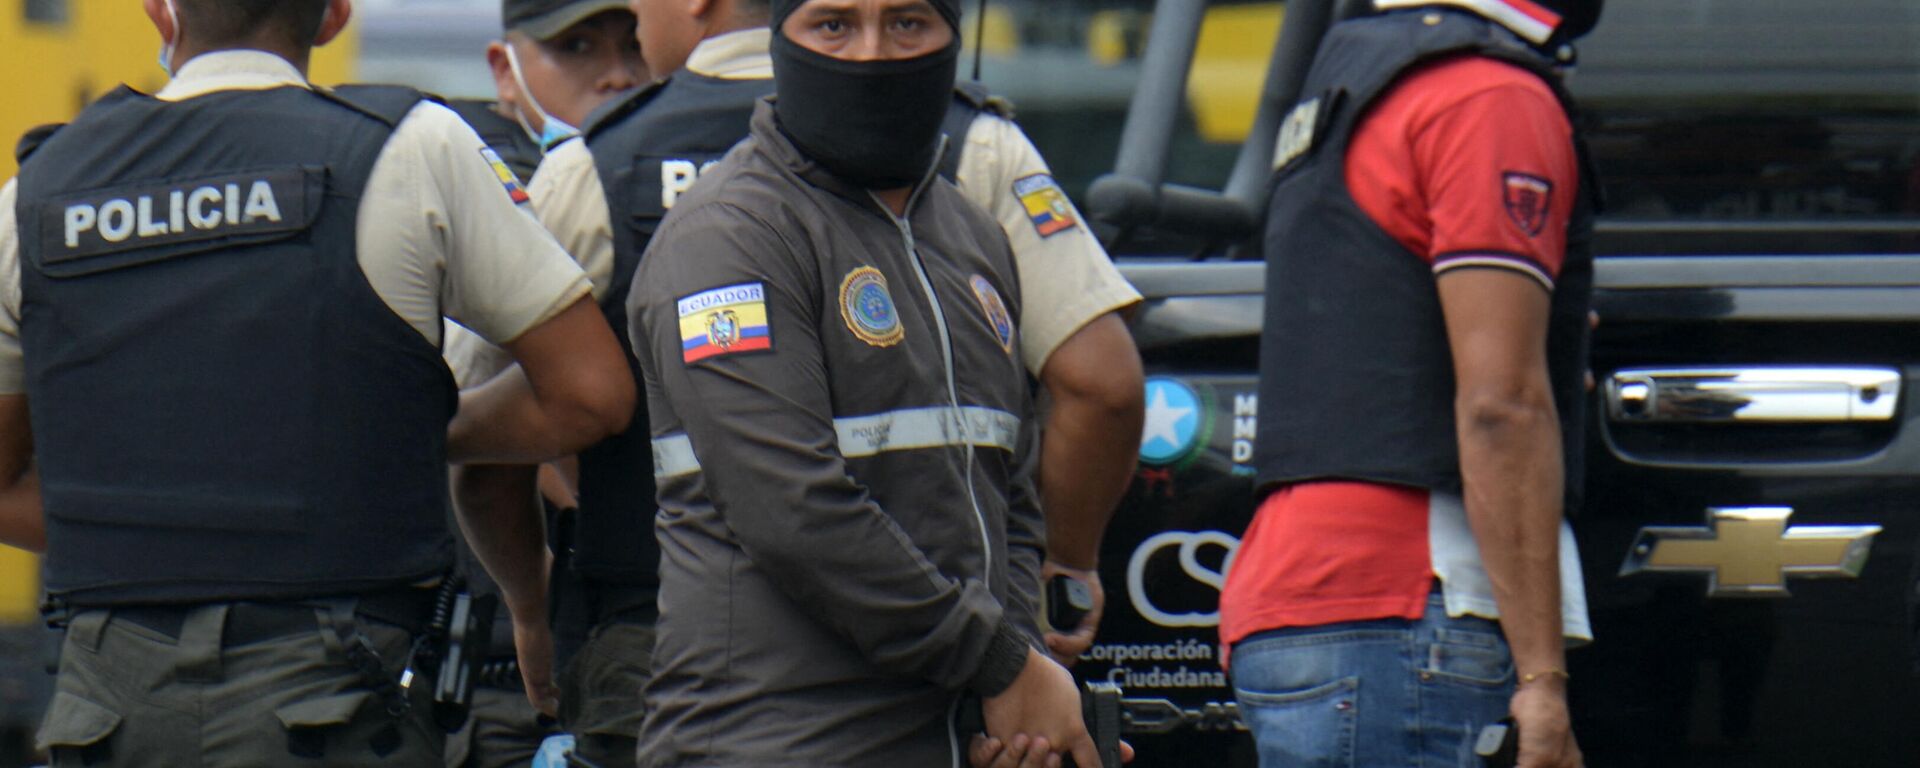 Ecuadorean police members take position outside the premises of Ecuador's TC television channel after unidentified gunmen burst into the state-owned television studio live on air on January 9, 2024, in Guayaquil, Ecuador, a day after Ecuadorean President Daniel Noboa declared a state of emergency following the escape from prison of a dangerous narco boss. Gunshots rang out on live TV in violence-torn Ecuador as armed men carrying rifles and grenades stormed the studio shortly after gangsters vowed a war against the president's plans to reclaim control from narcoterrorists. - Sputnik International, 1920, 10.01.2024